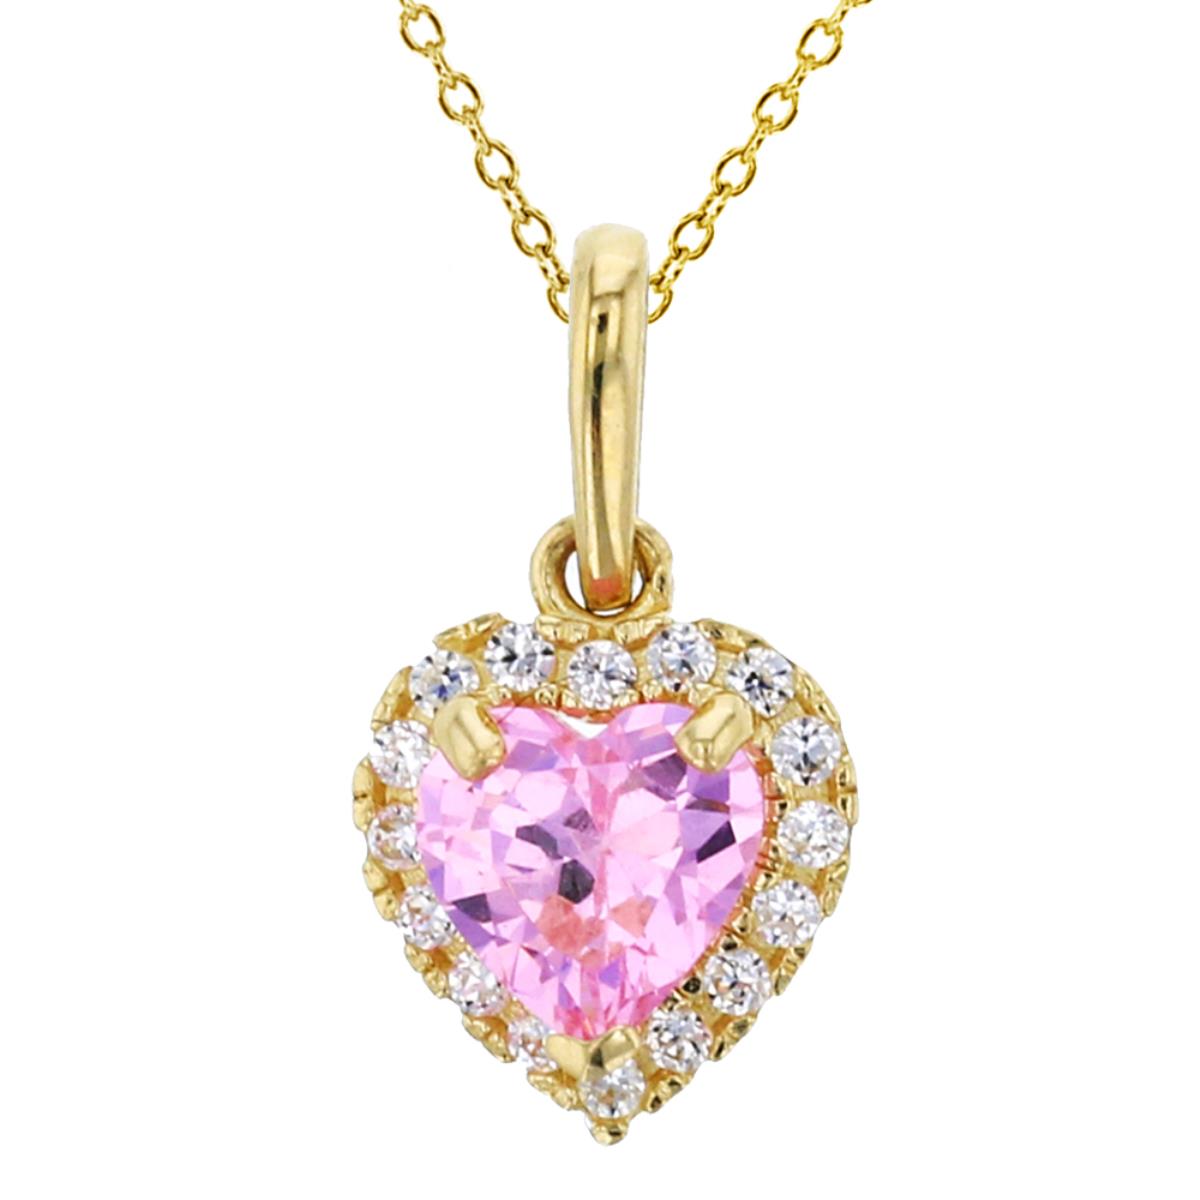 10K Yellow Gold 5mm Heart Cut Pink & CZ Halo Dangling 18" Necklace